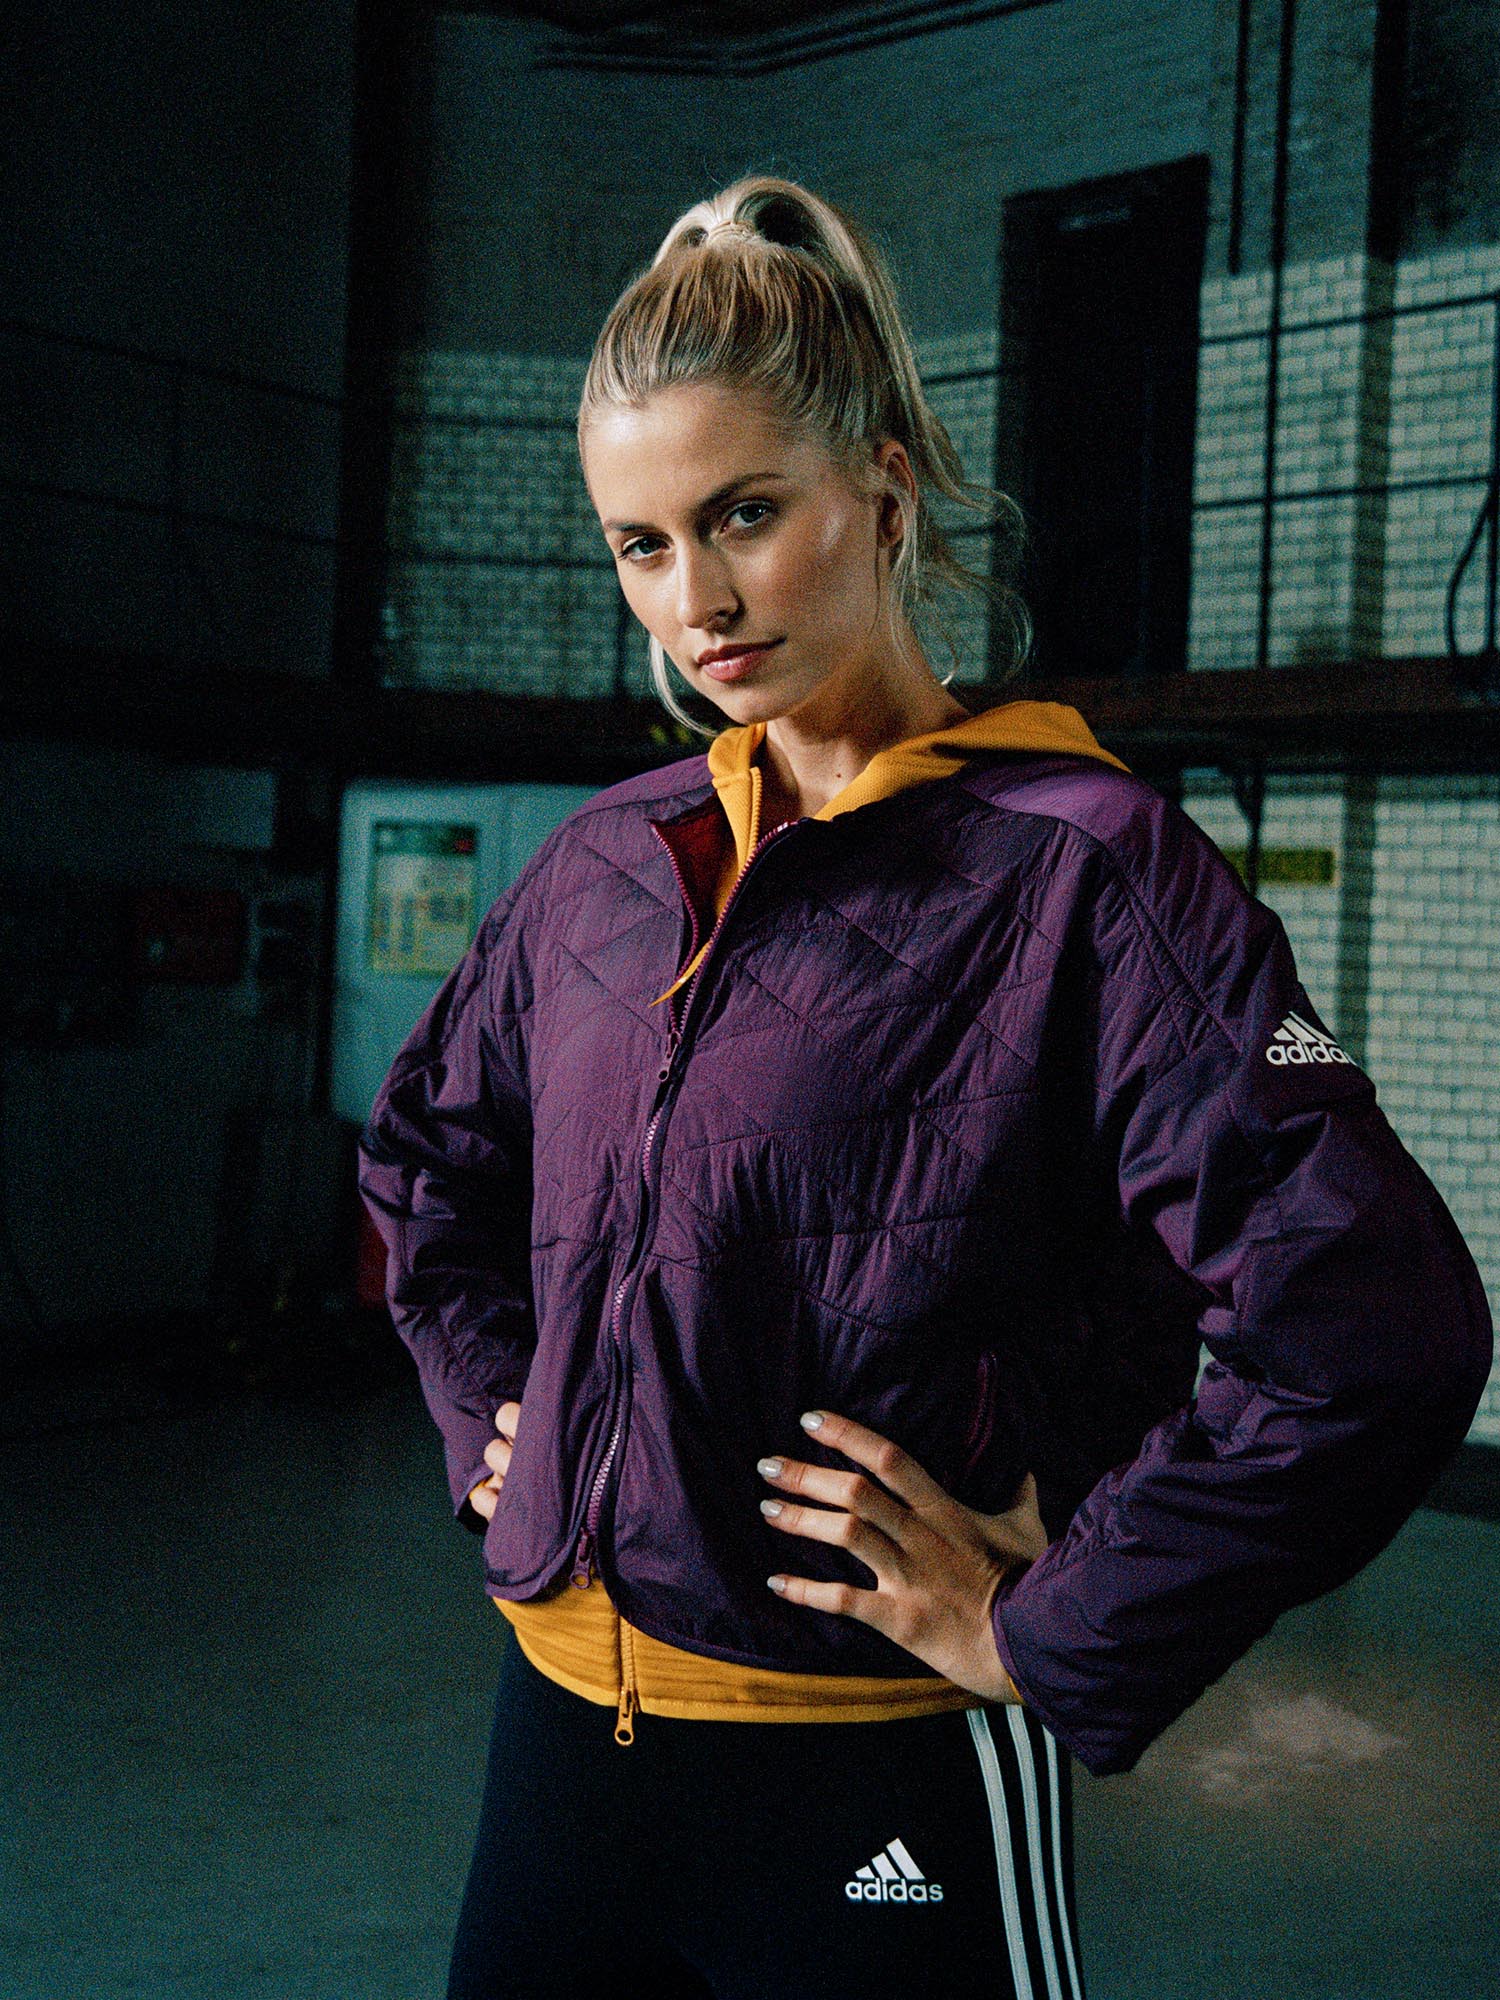 Lena Gercke adidas about you 09